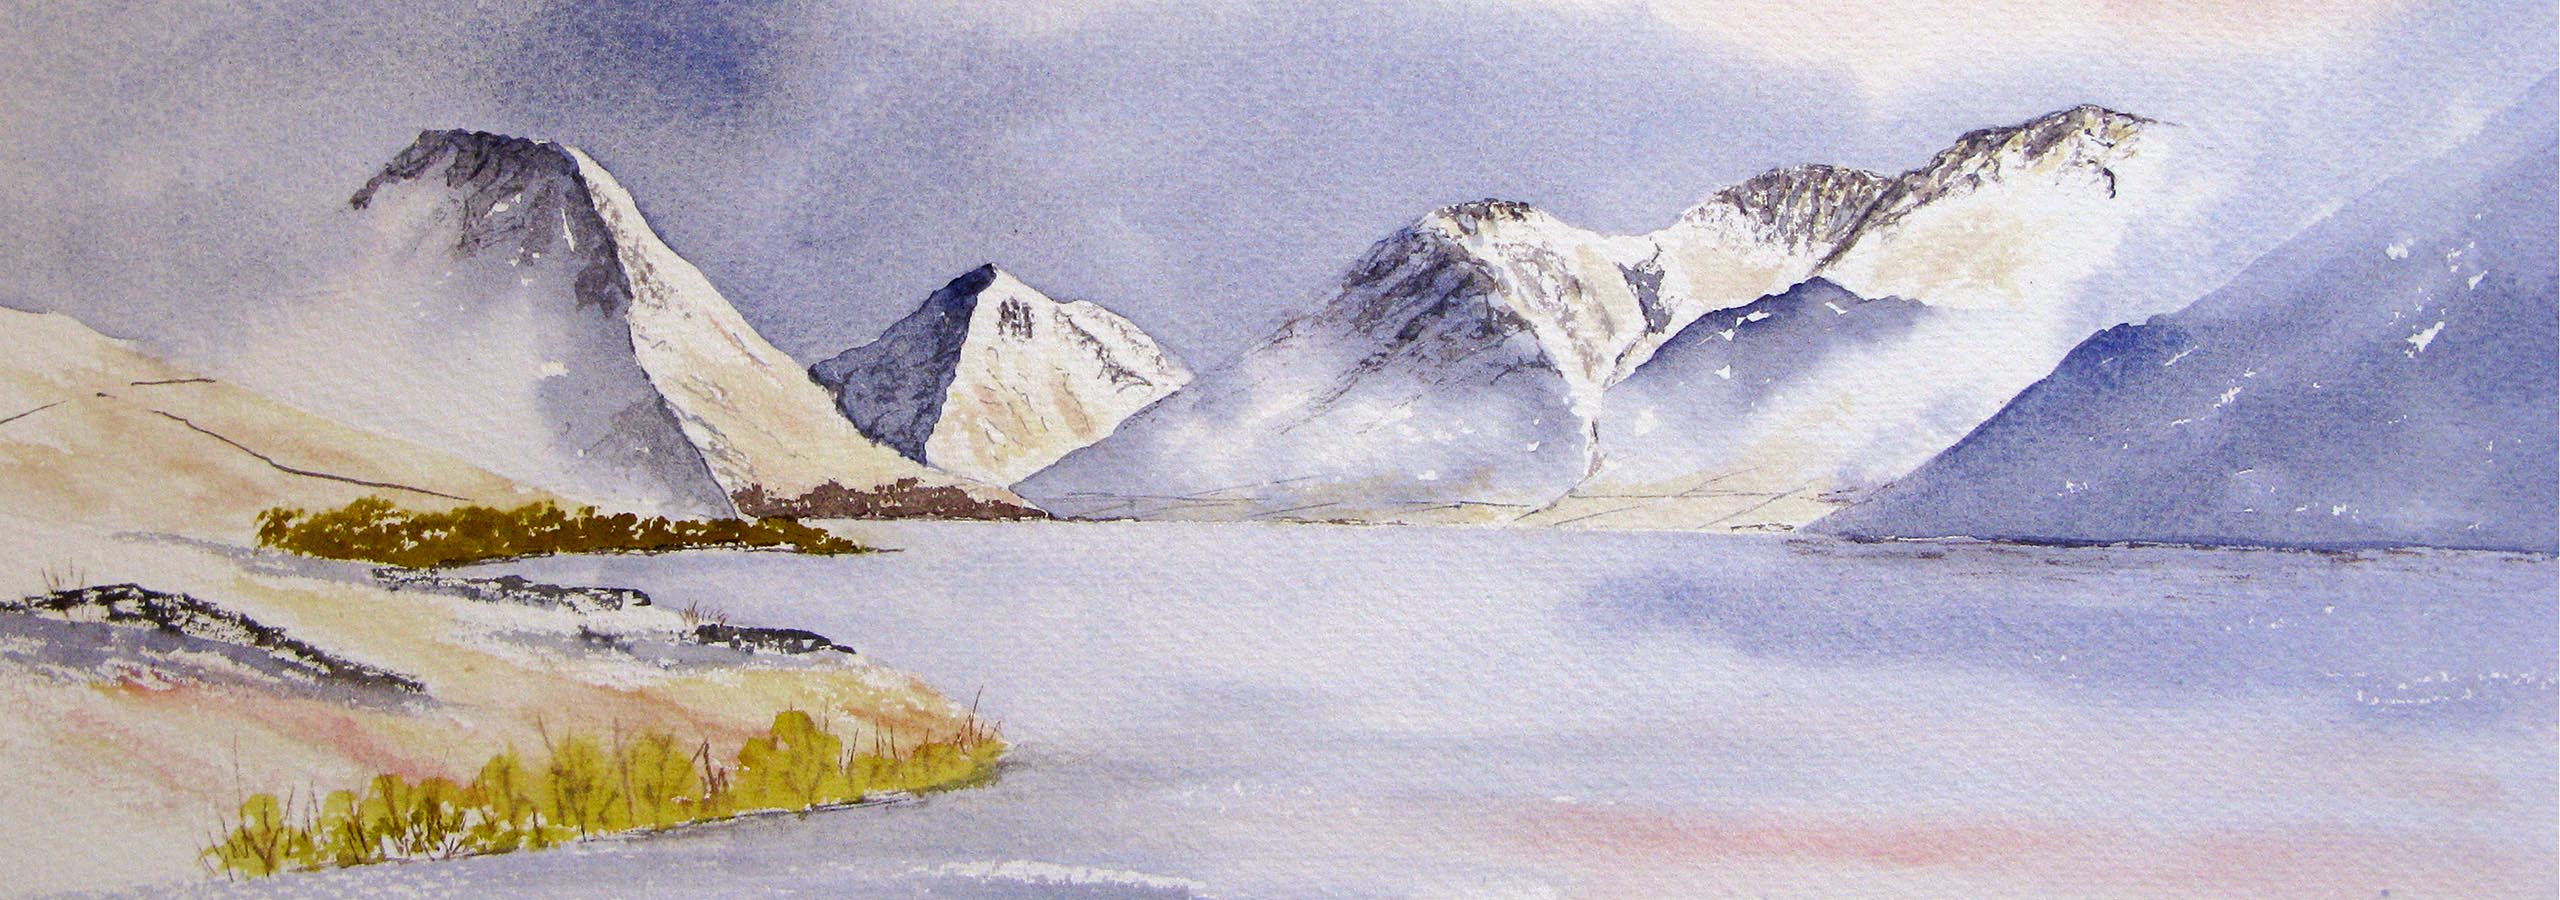 Winter Wastwater painted in watercolours